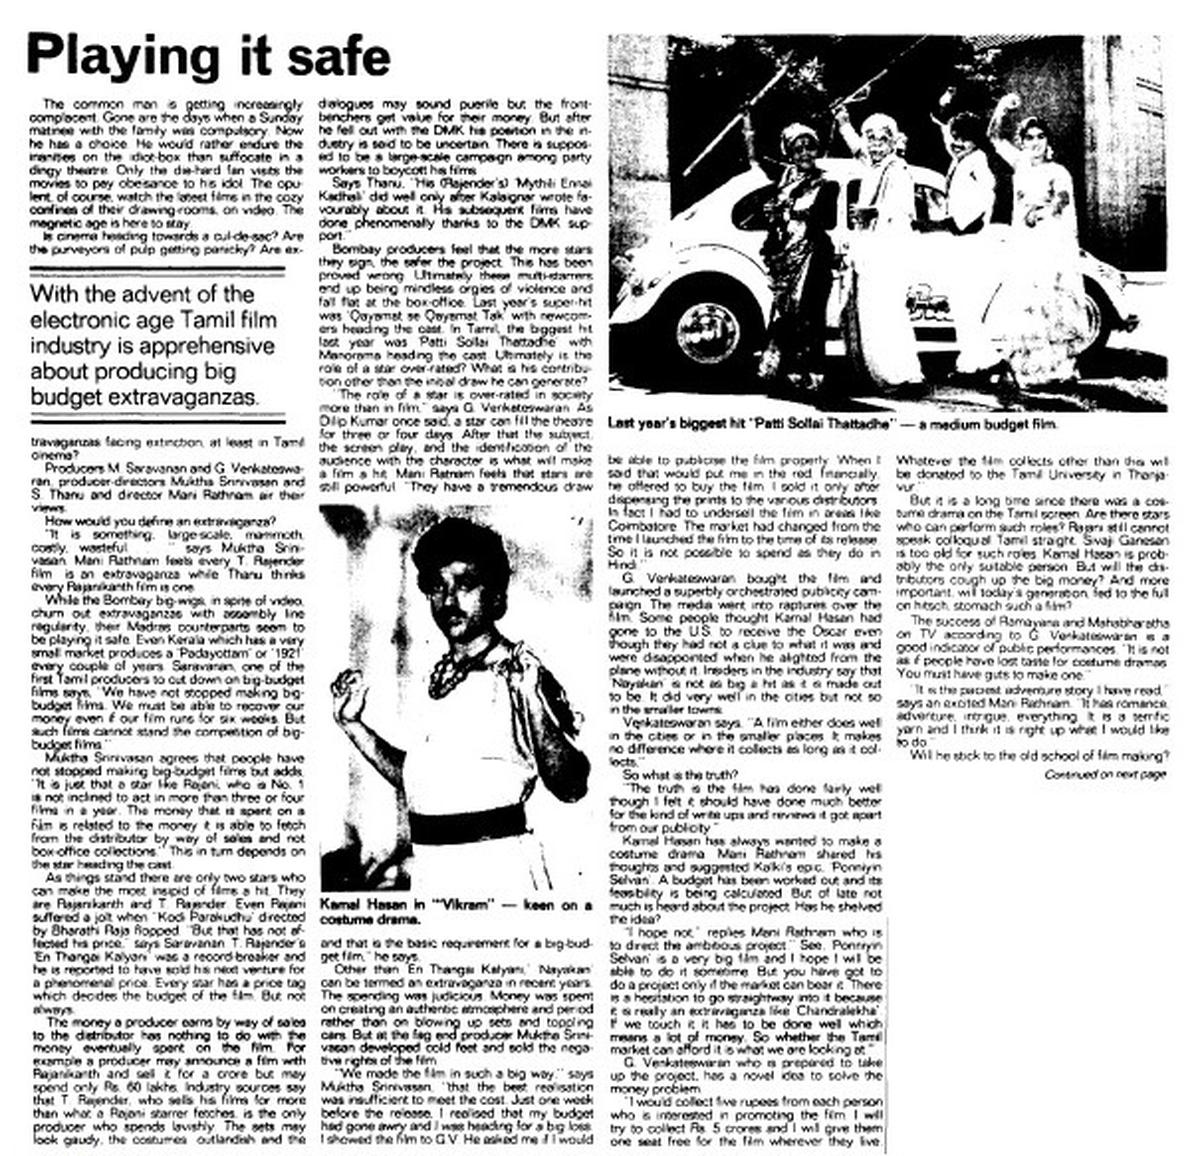 ‘Playing it safe’: The news report published by The Hindu on 24-03-1989